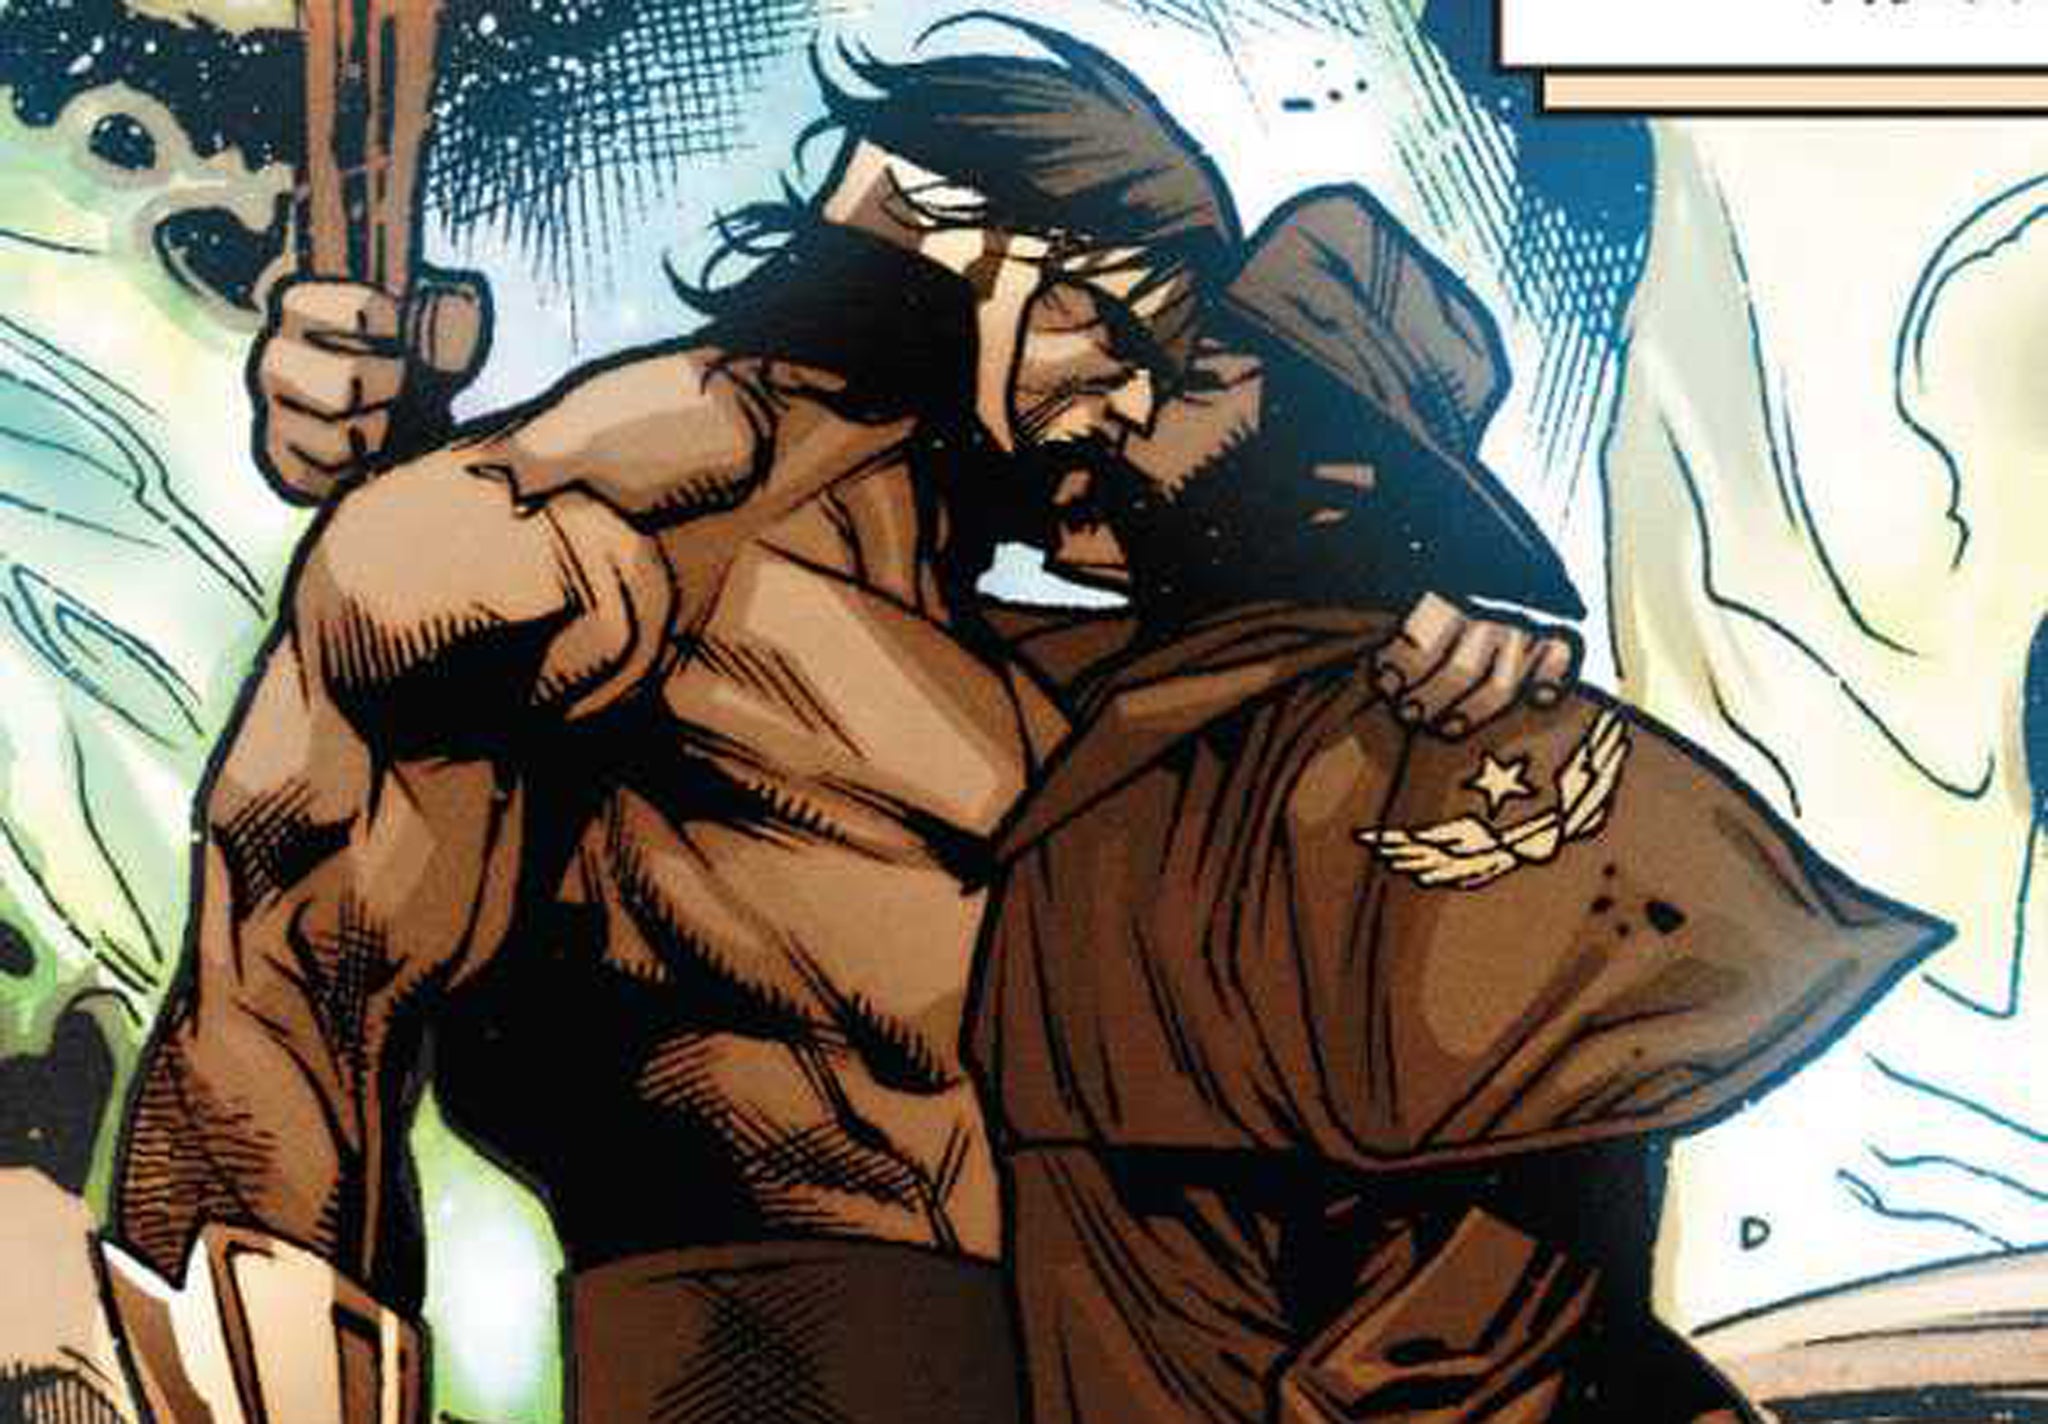 Hercules and Wolverine share a kiss